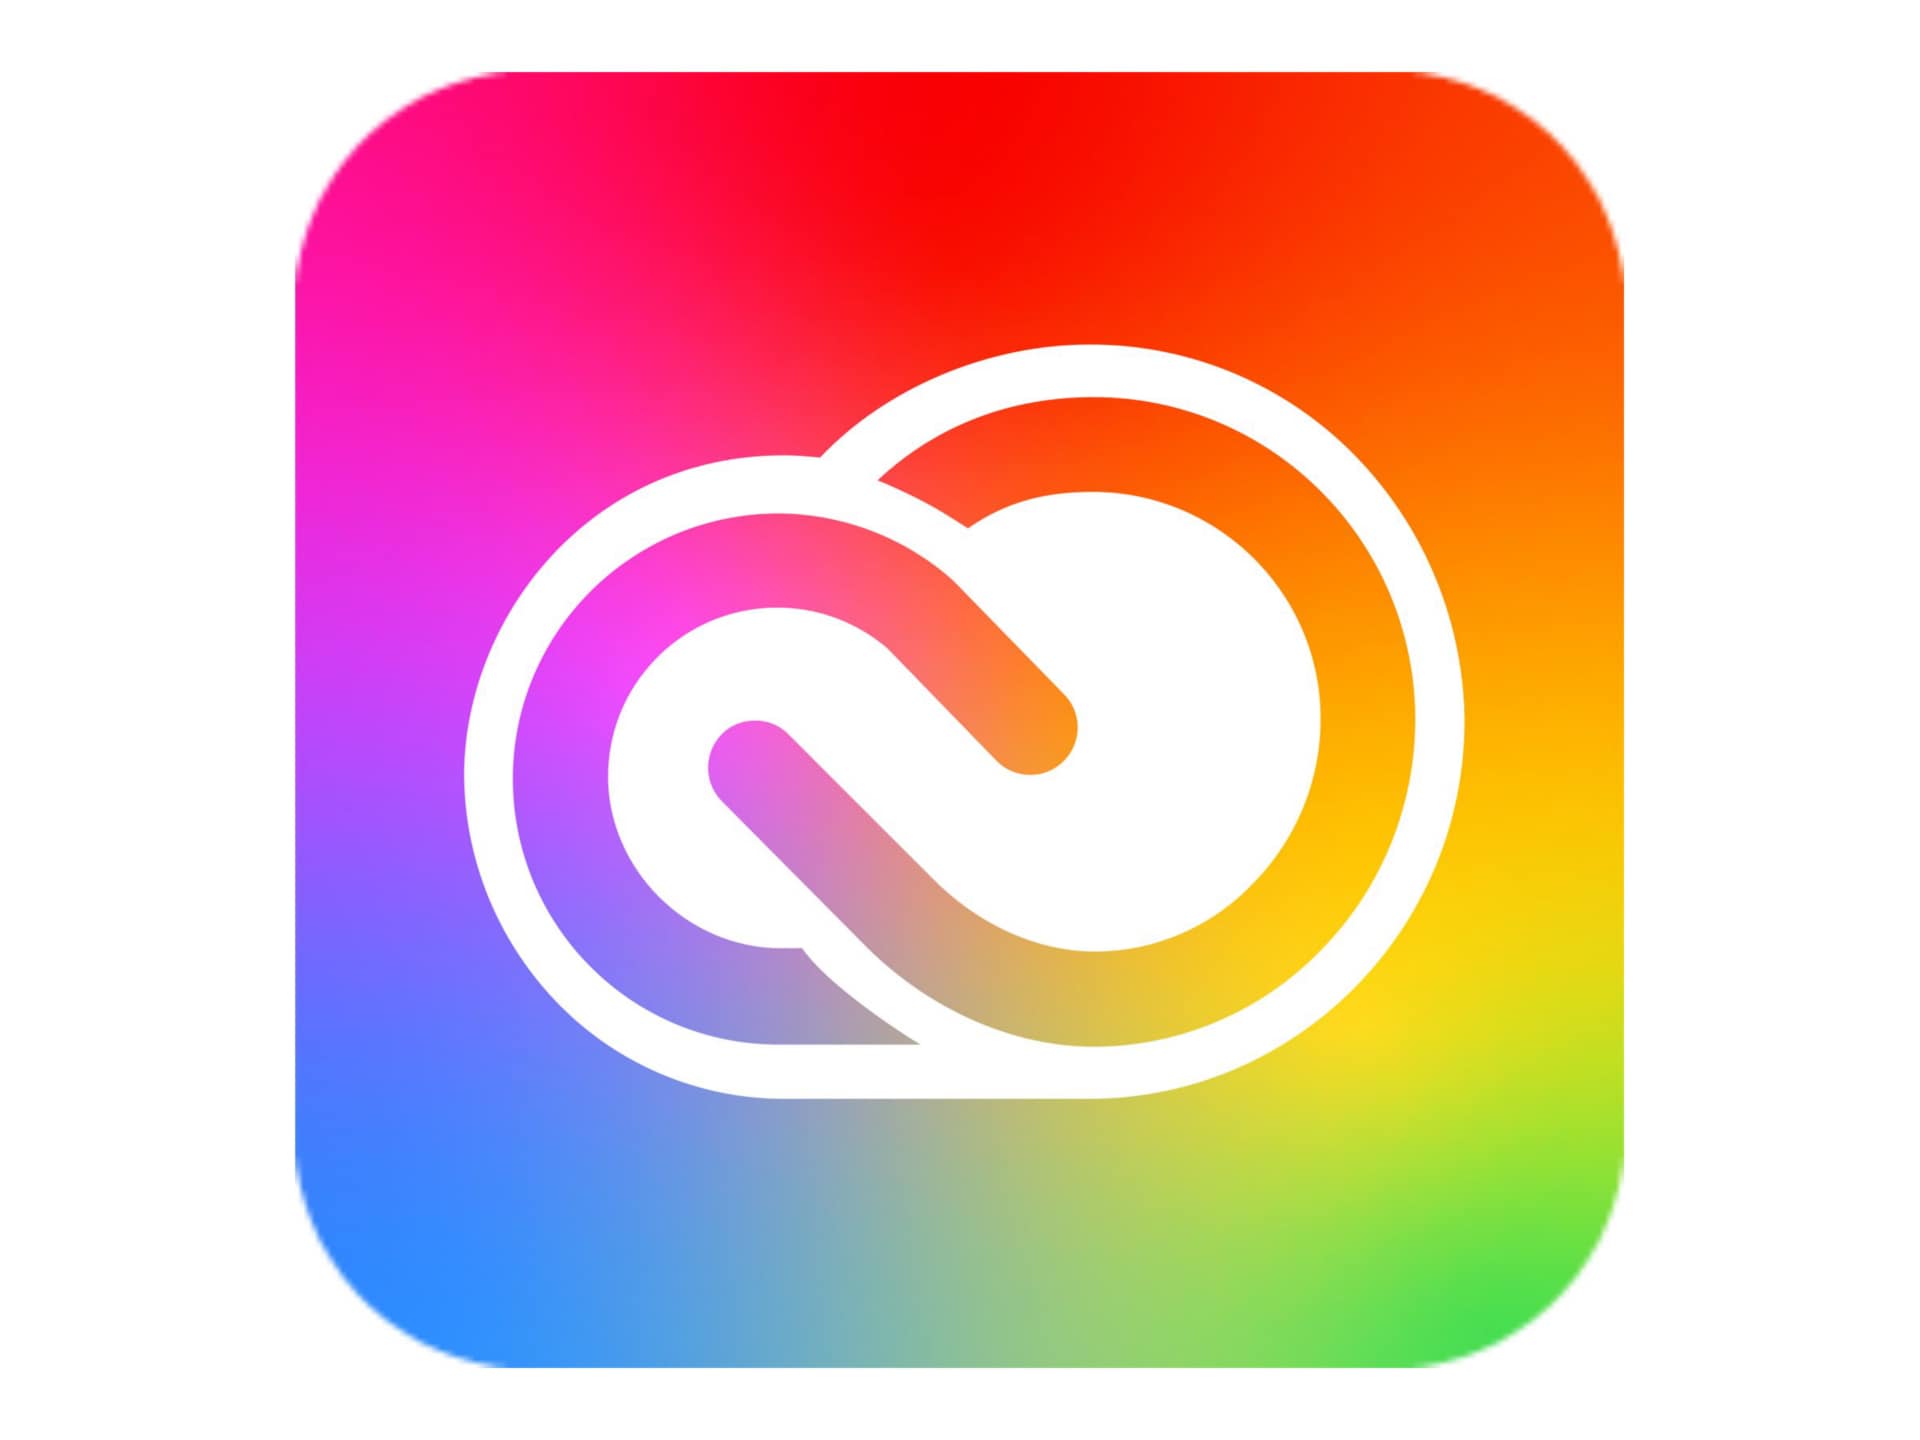 Adobe Creative Cloud for Enterprise - All Apps - Subscription New (7 months) - 1 device